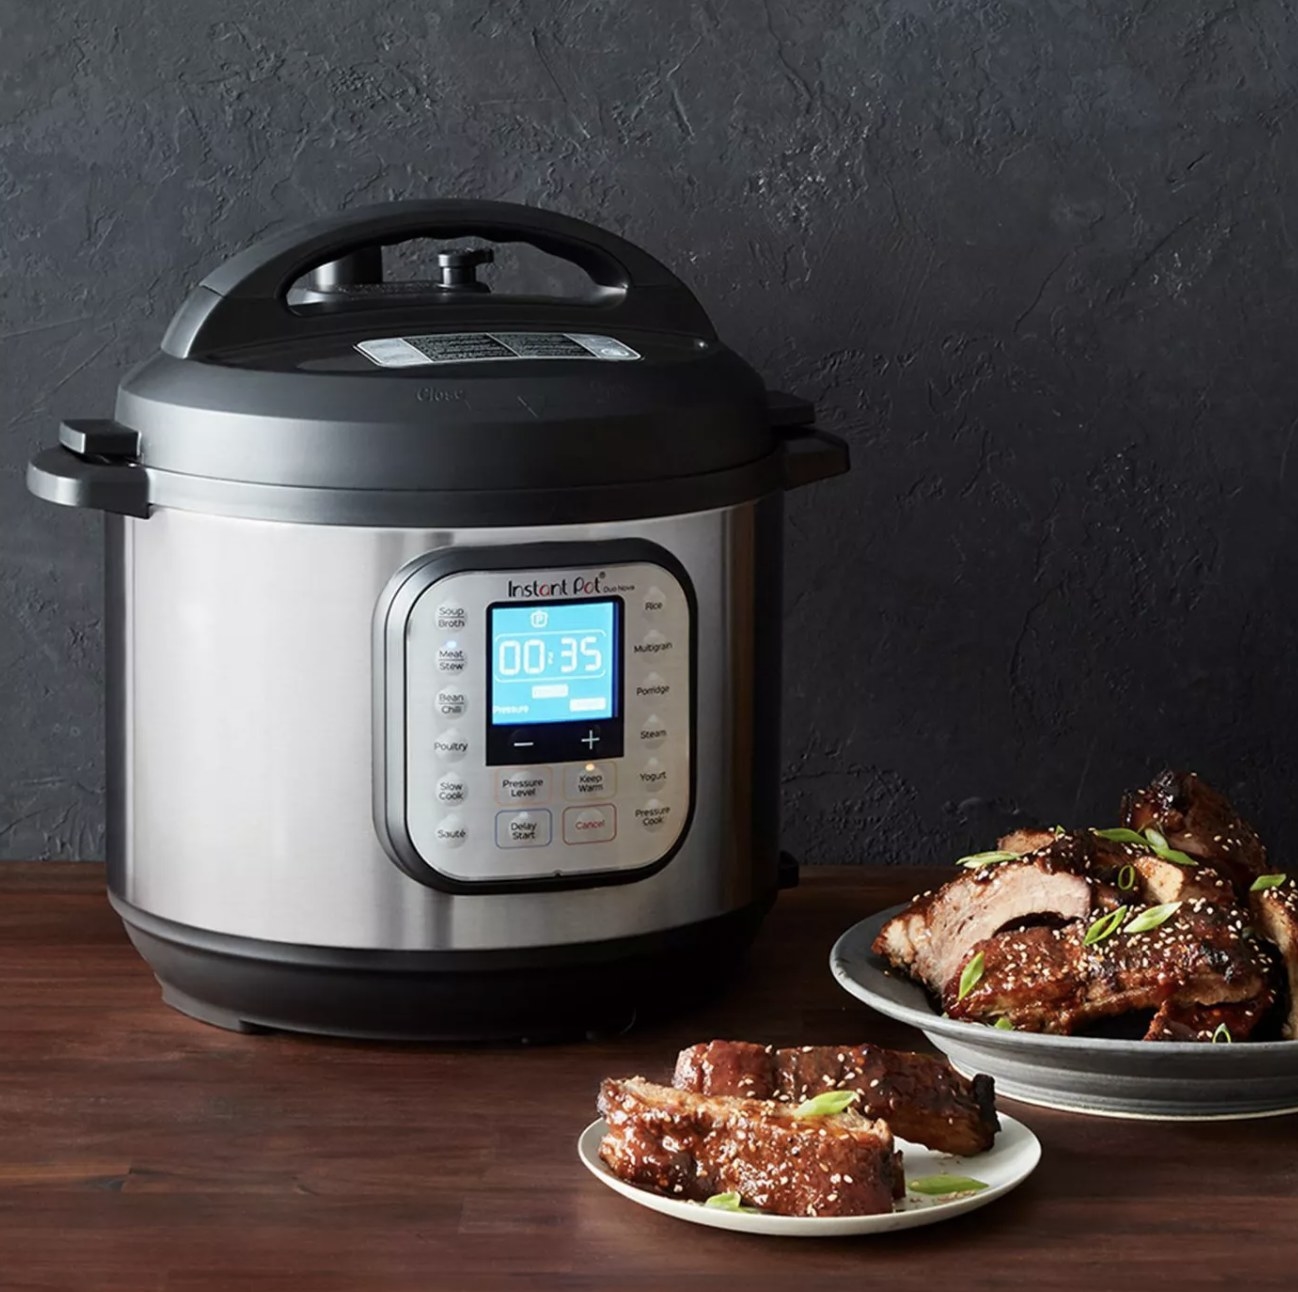 The Instant Pot next to food